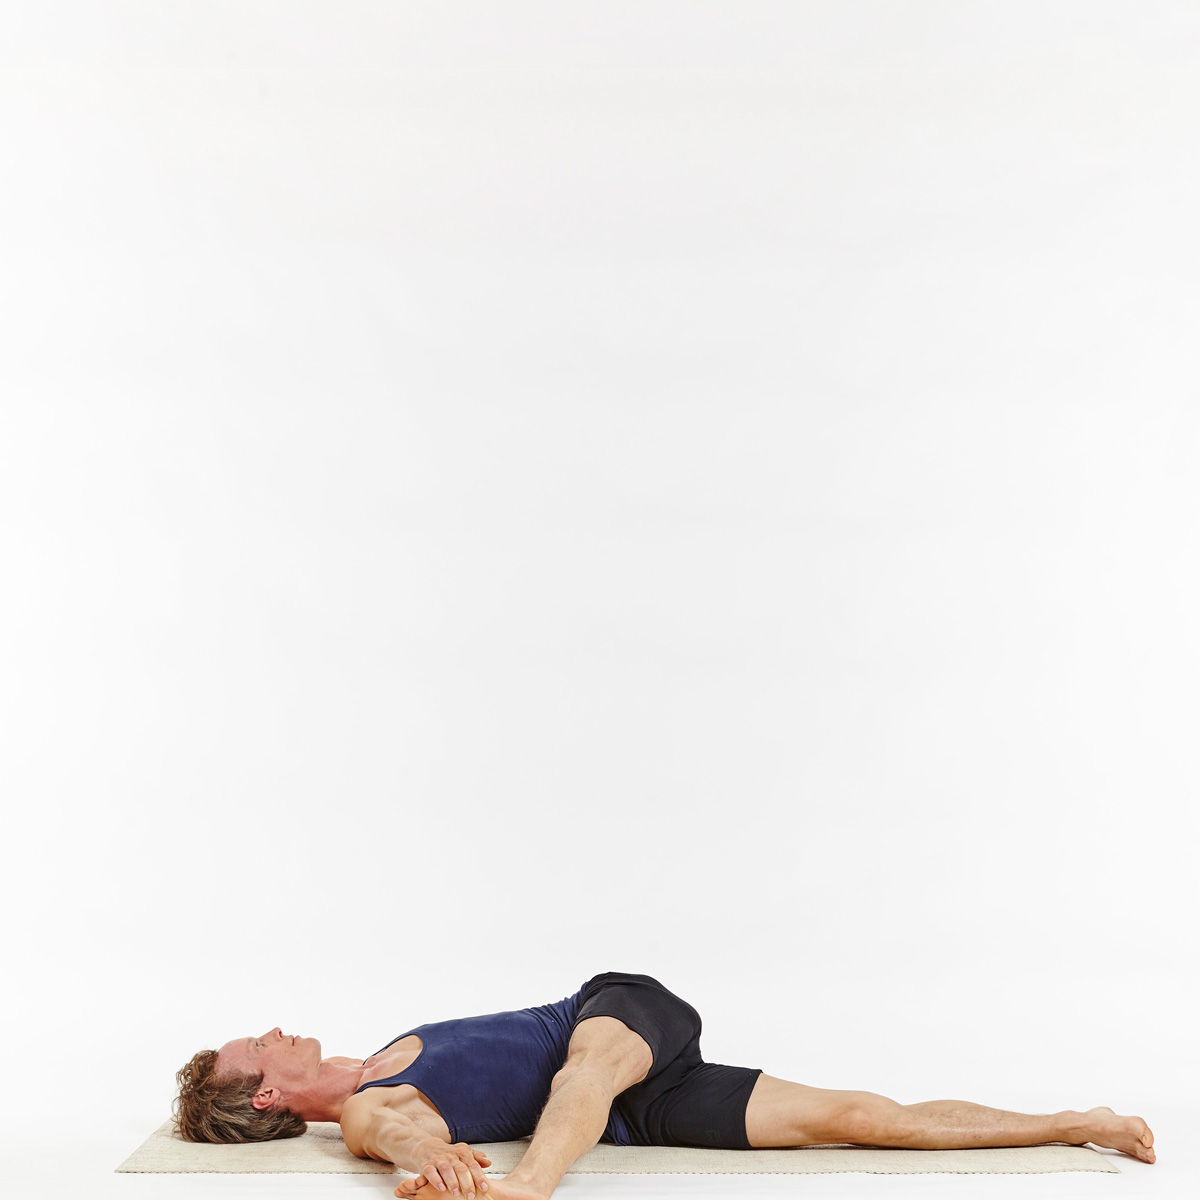 8 Yoga Poses to Prevent Running Injuries | Bluefin Software Blog